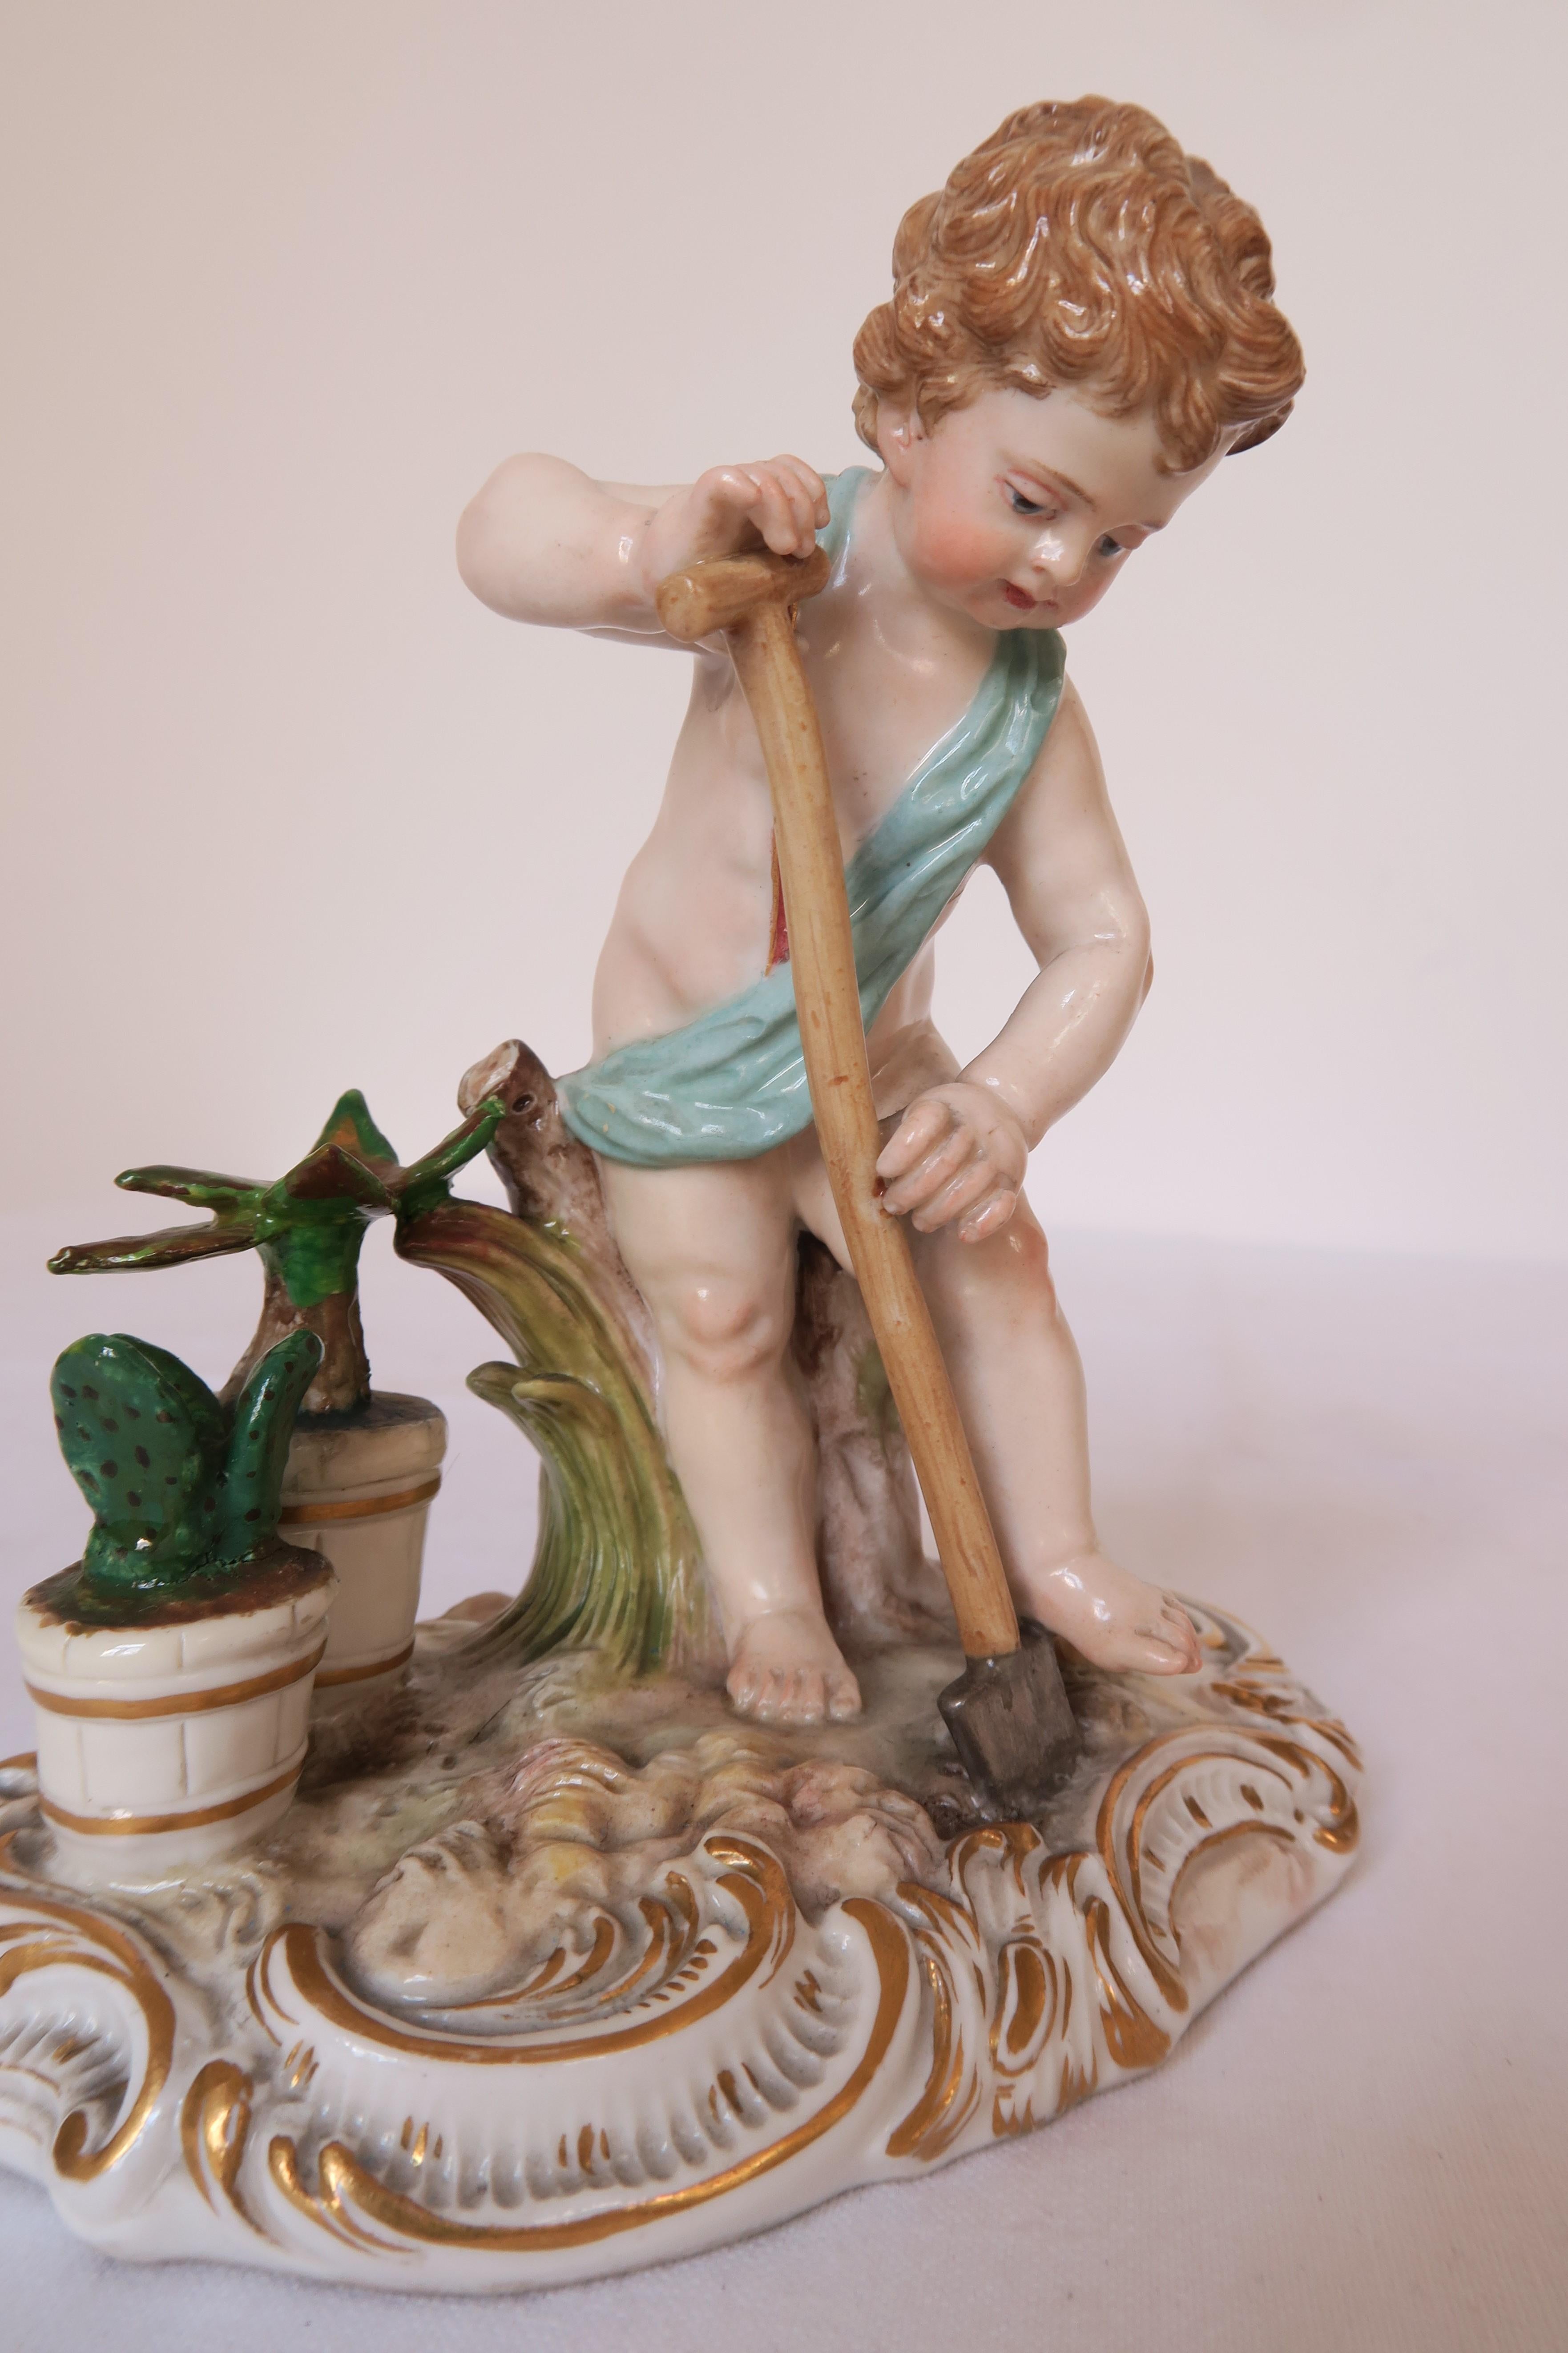 For sale in this ad you can find the sweetest little porcelain figurine. It was manufactured by Meissen Porcelain in the 1860s. The figurine depicts a little gardener working away in his garden. He is surrounded by plants and garden tools. The